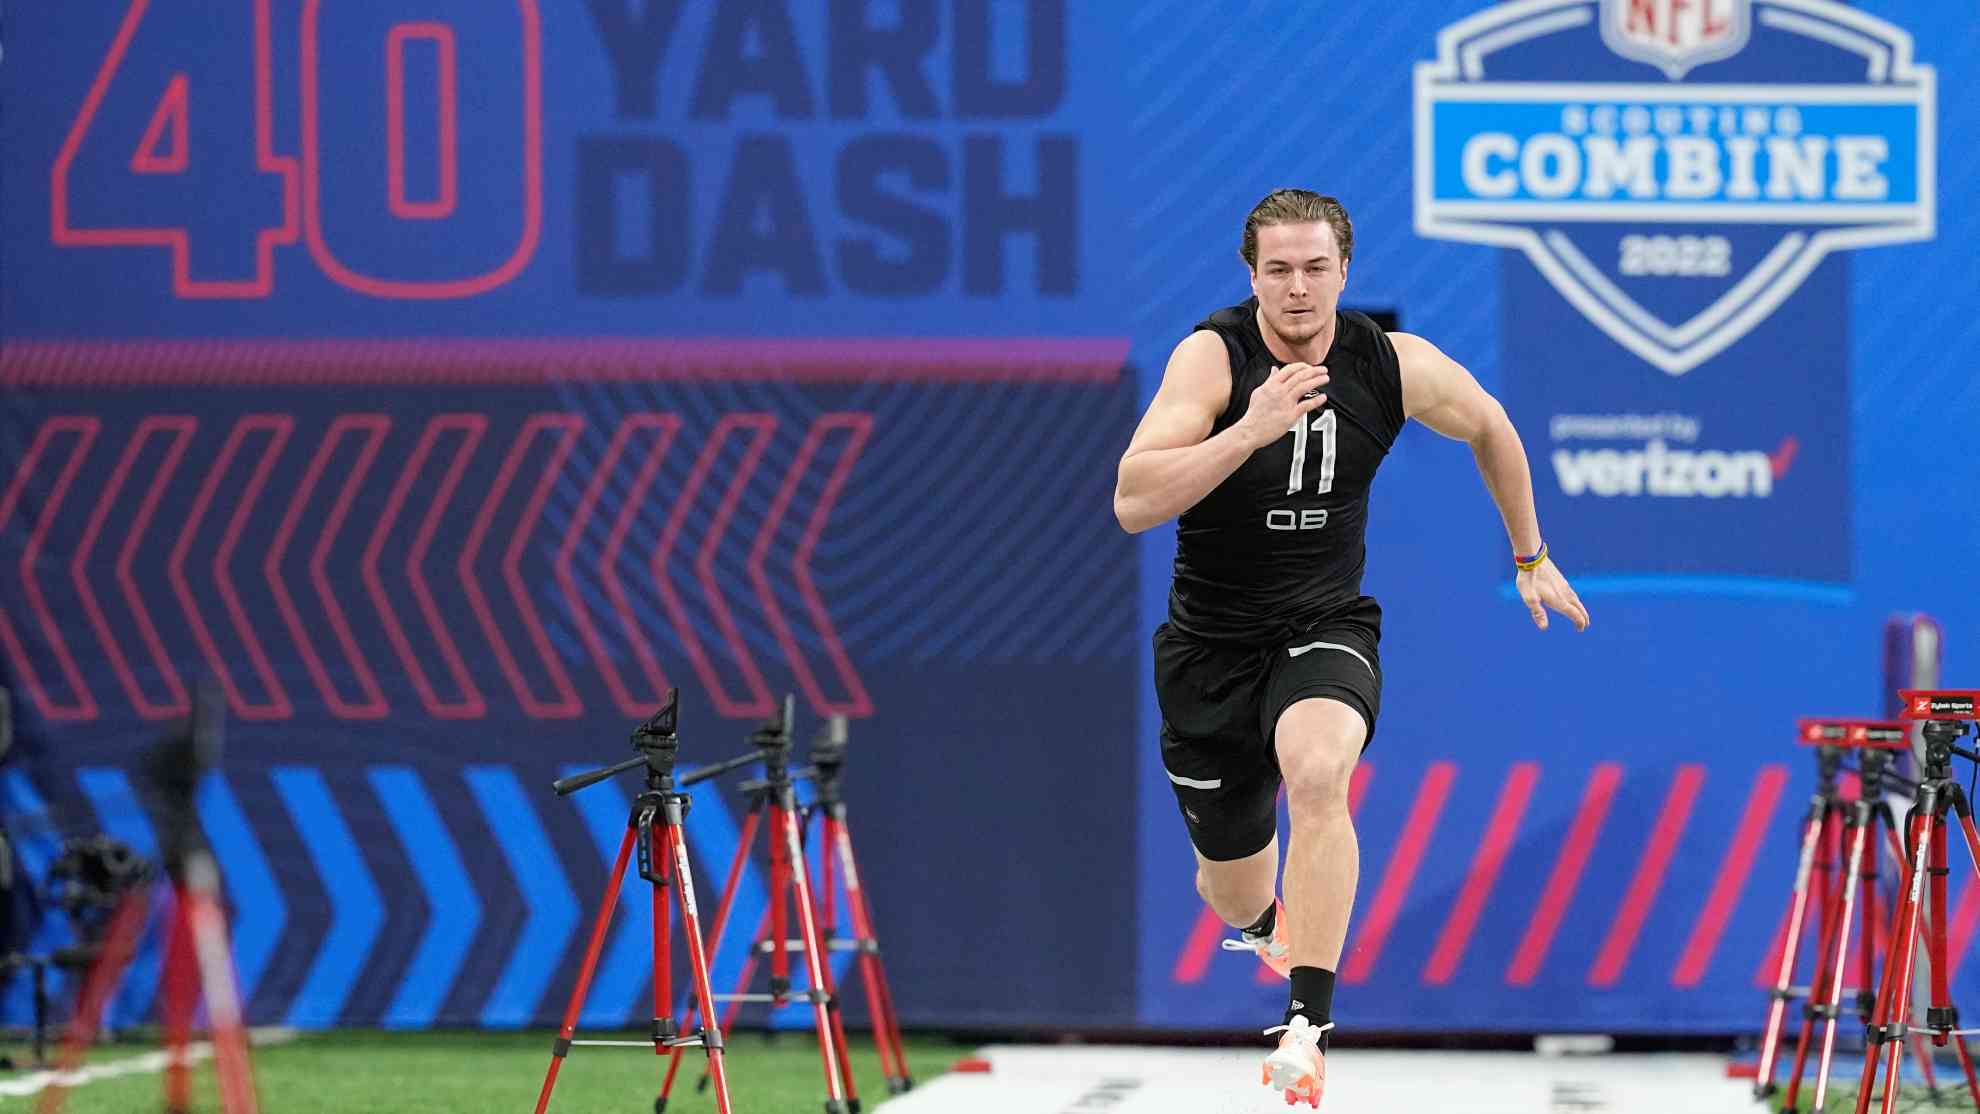 Where to watch NFL Combine? TV Channel, Schedule and more